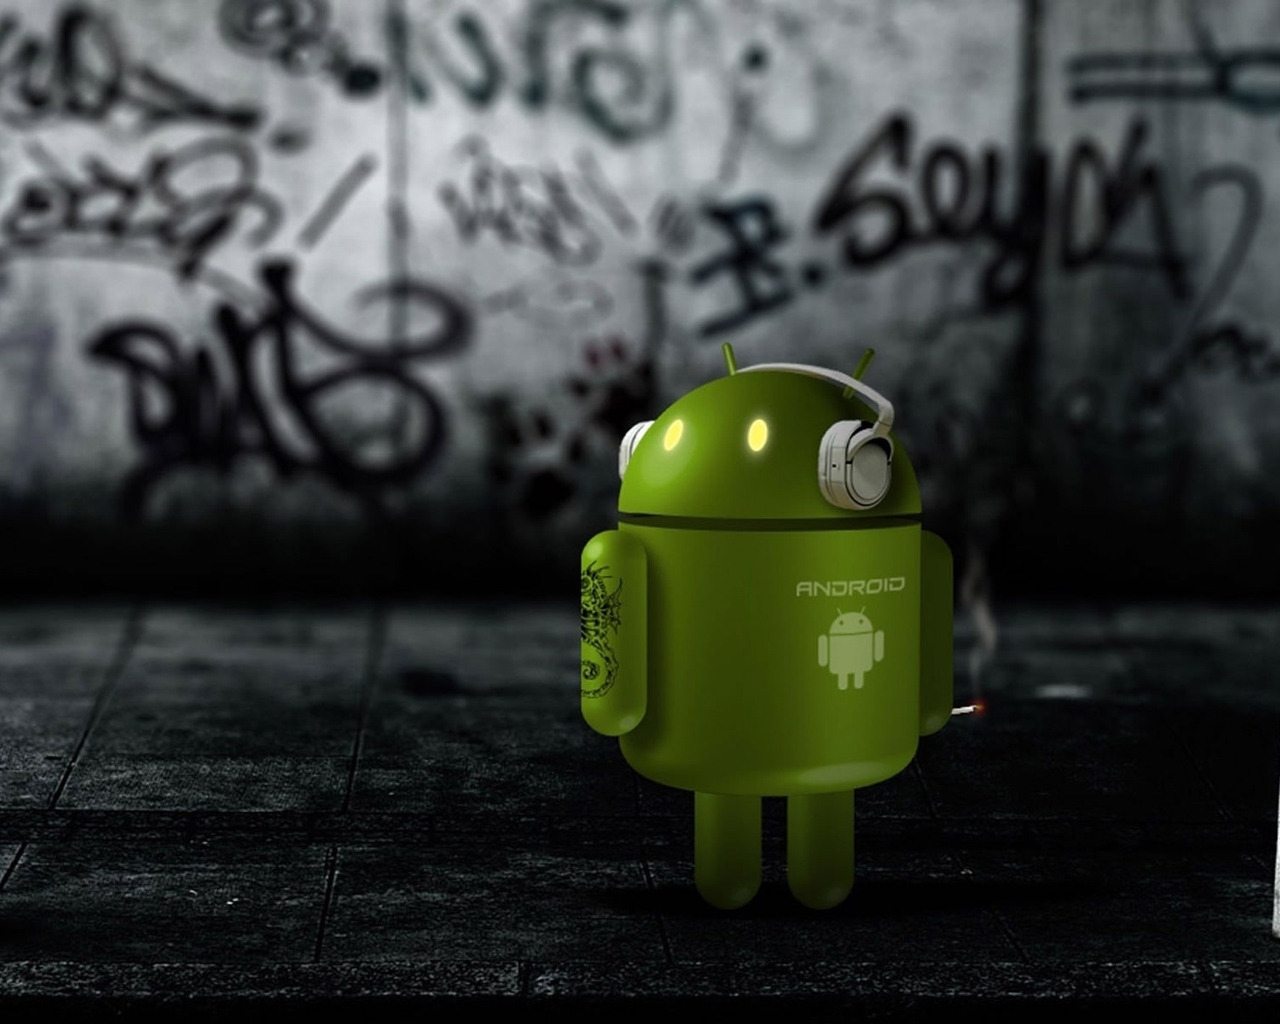 Android Robot for 1280 x 1024 resolution